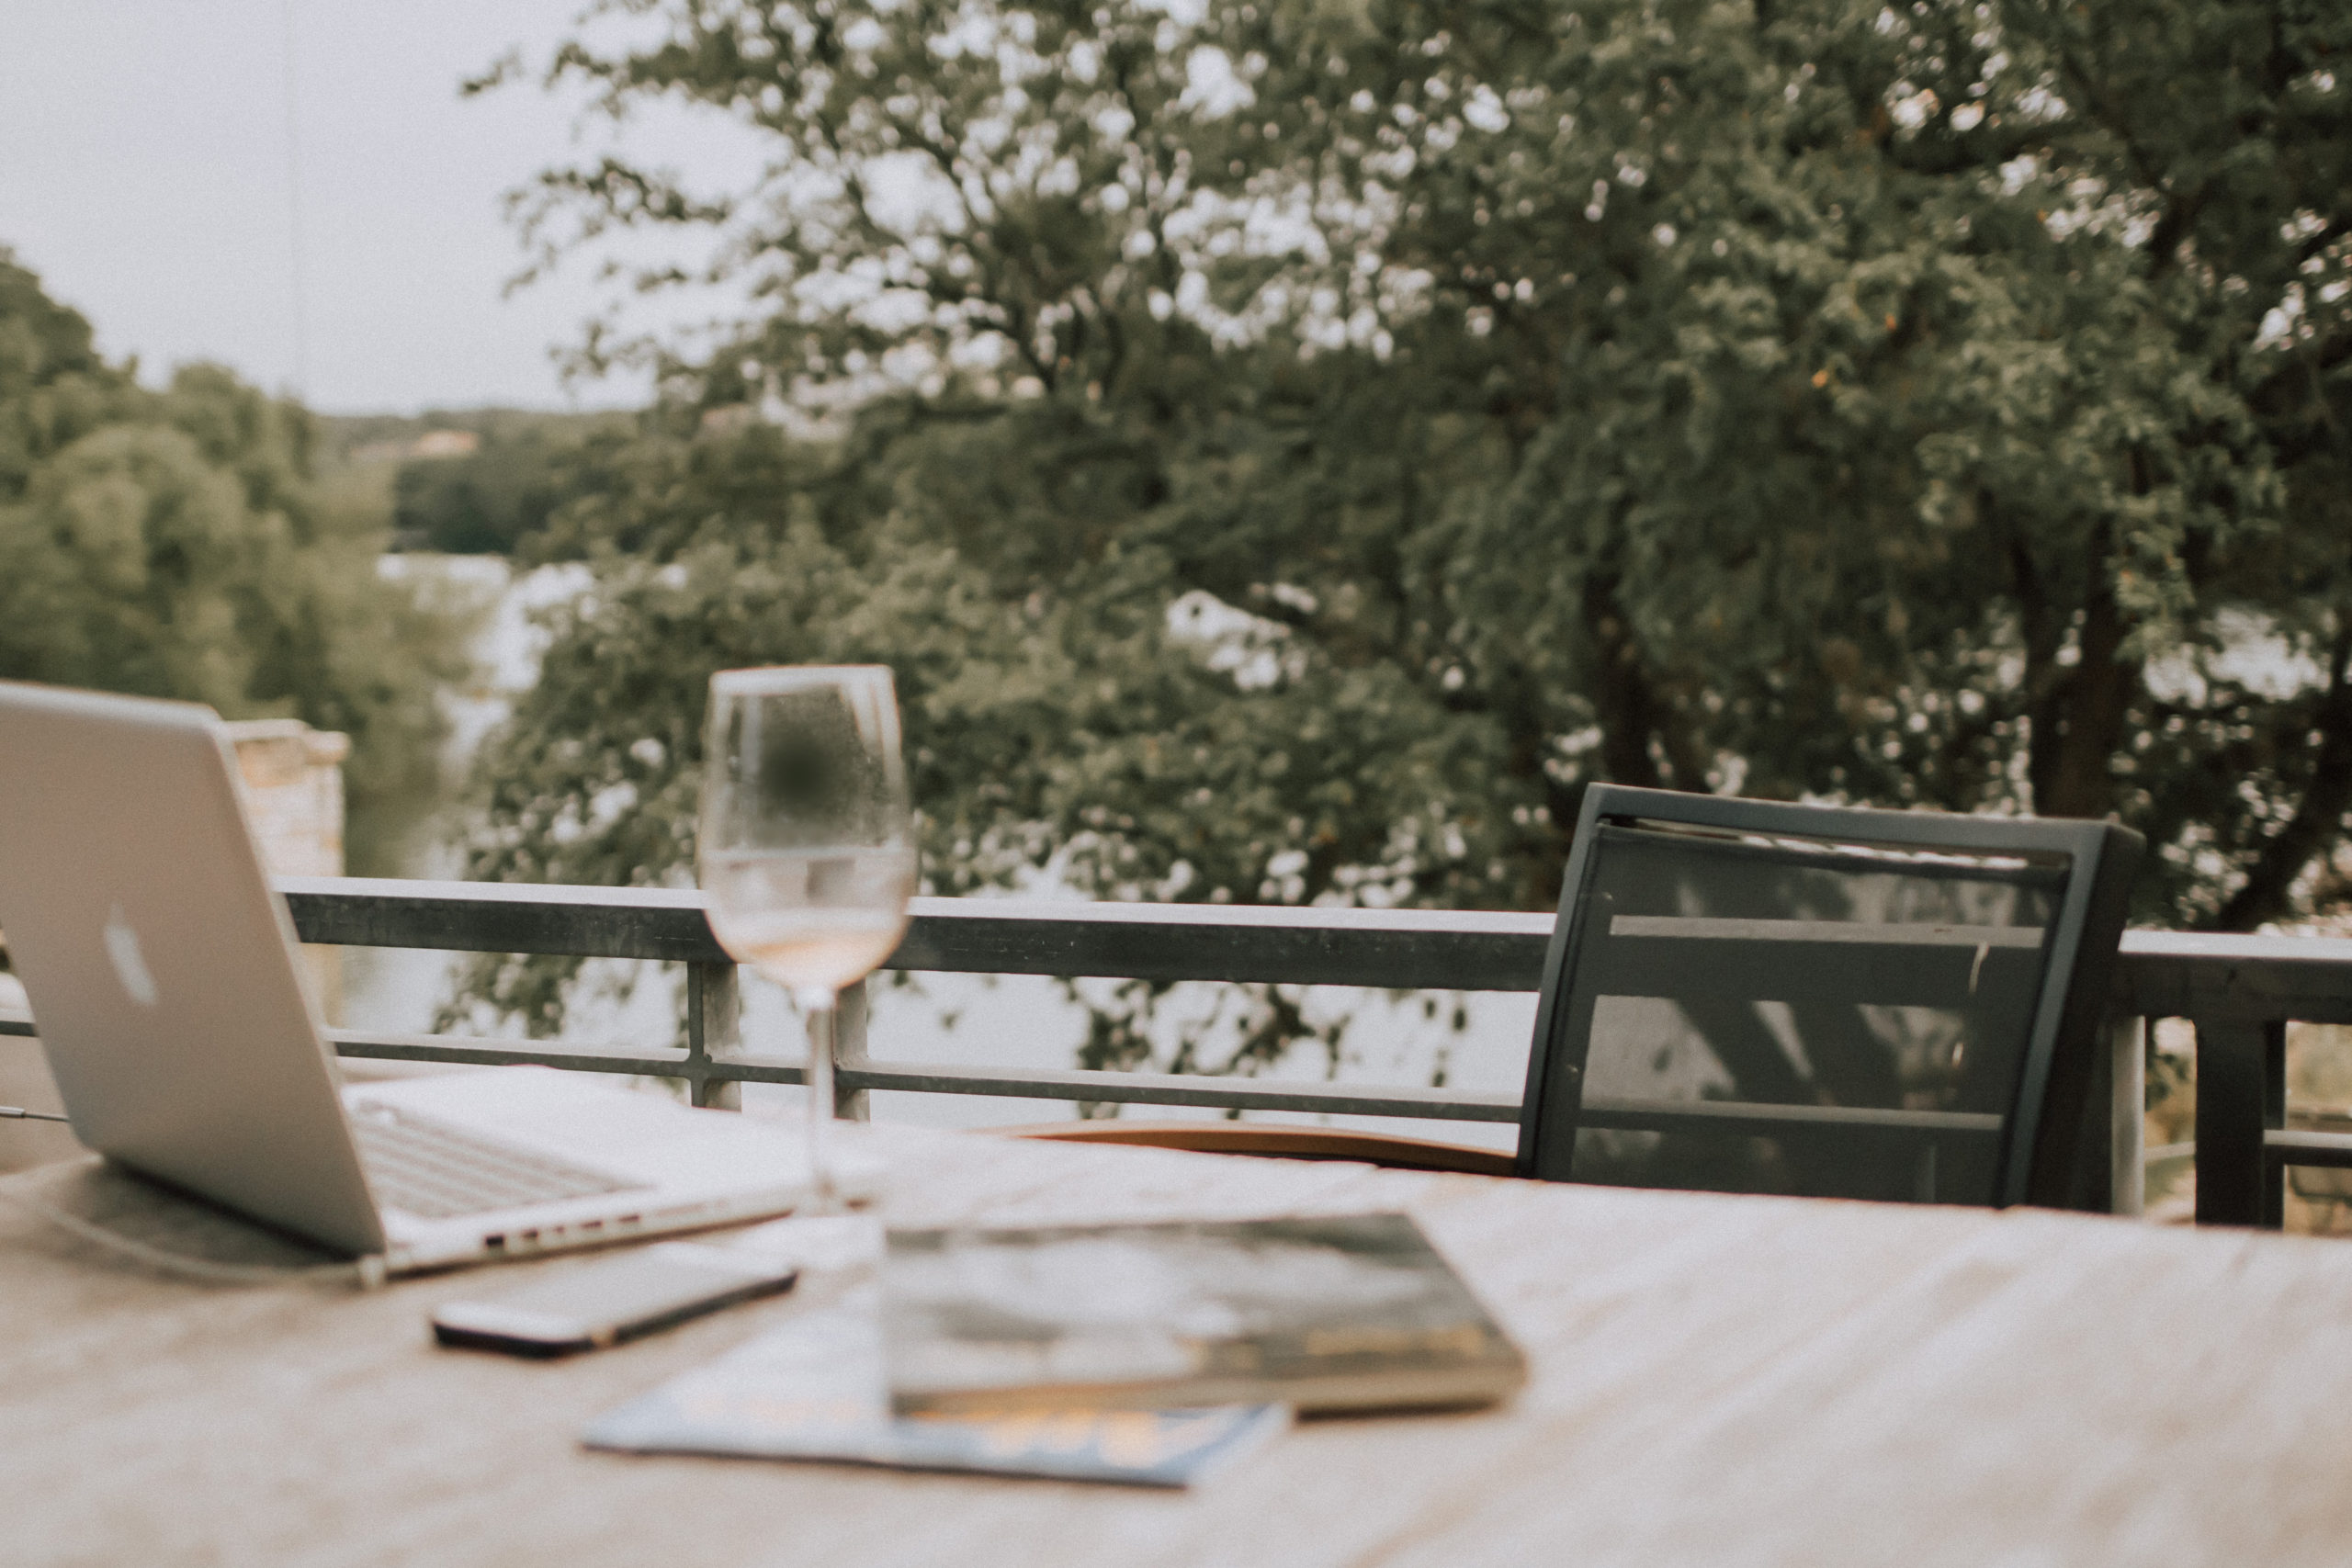 Wine glass and laptop on outdoor deck. Photo by Christin Hume on Unsplash.